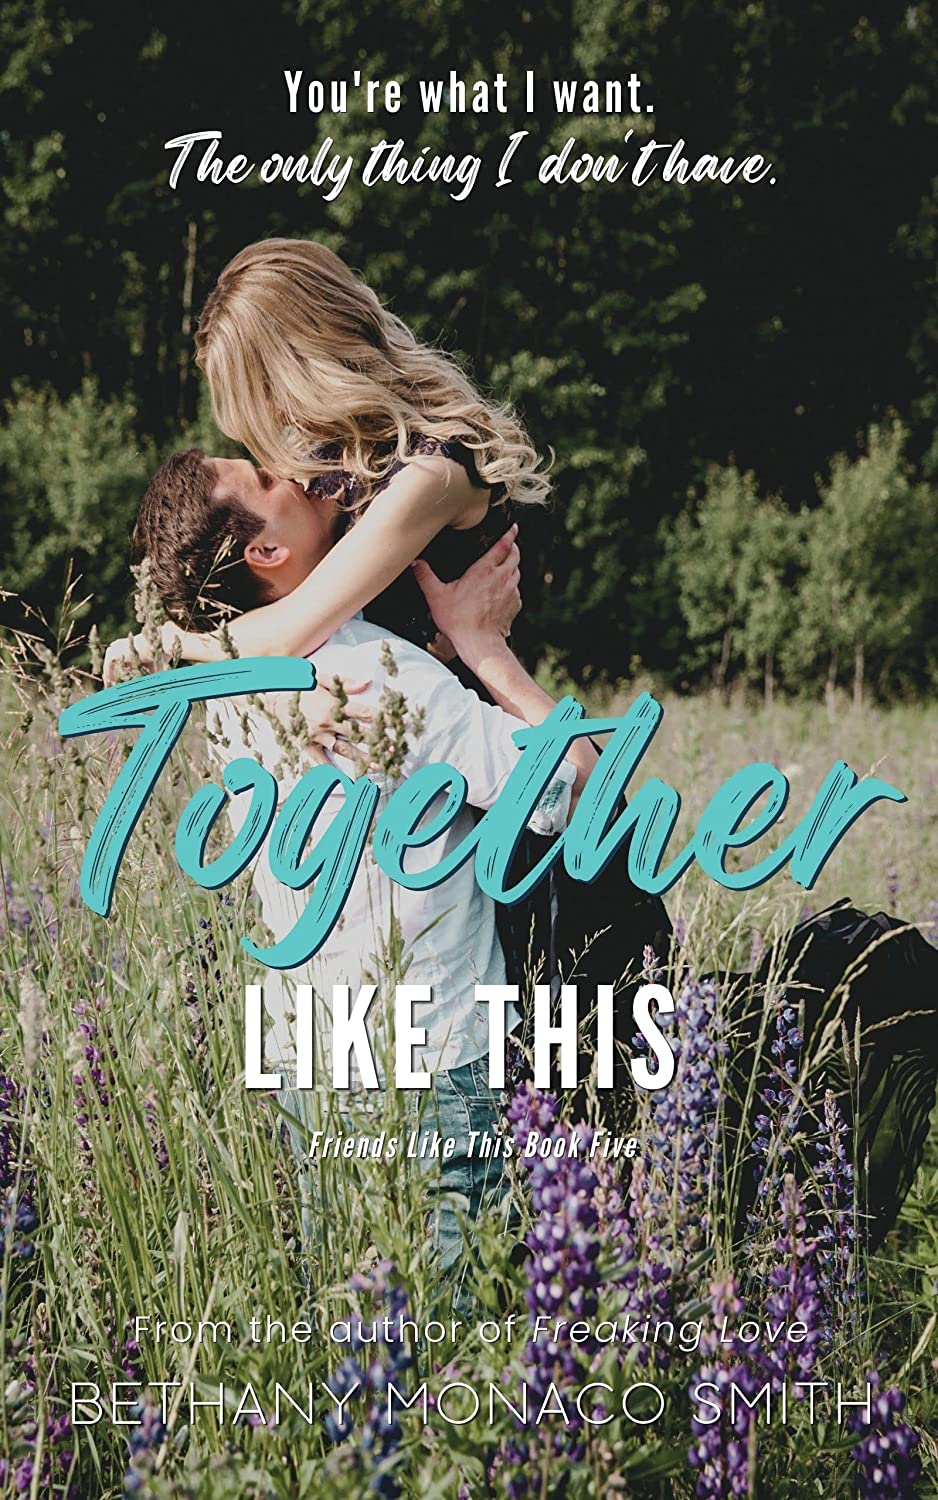 Together Like This by Bethany Monaco Smith PDF Download